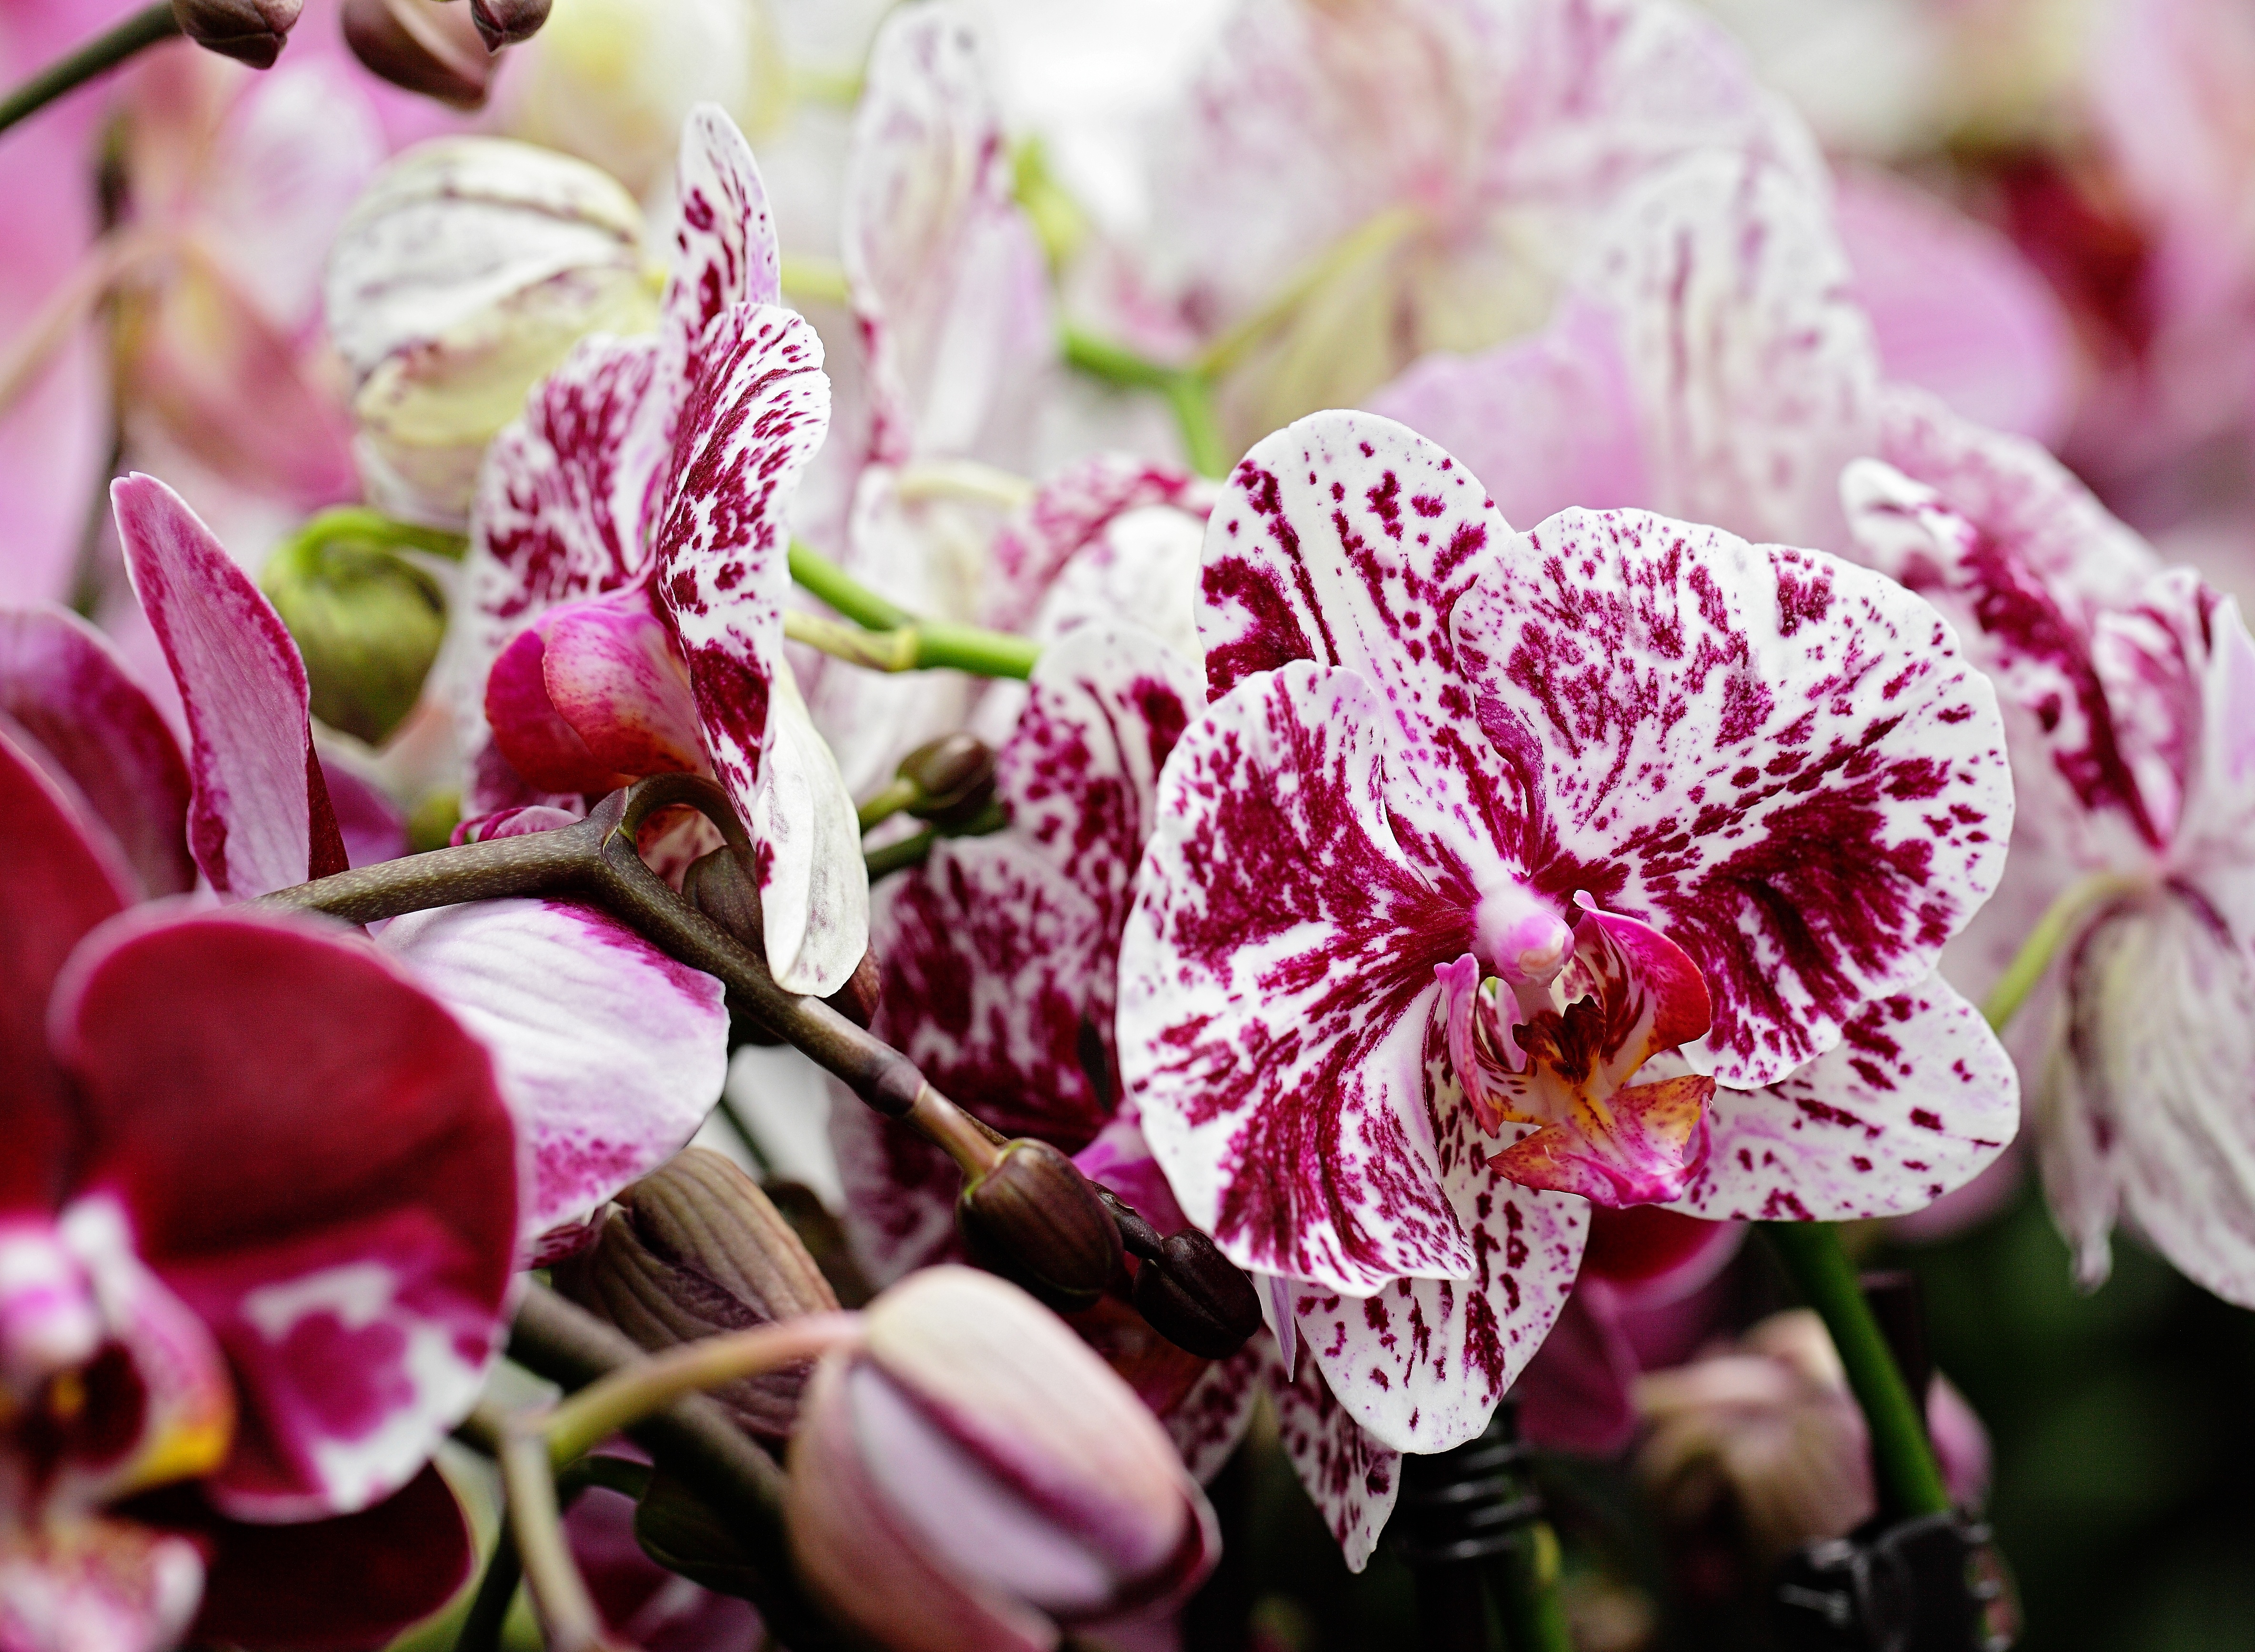 What Makes Phalaenopsis Orchids So Popular?